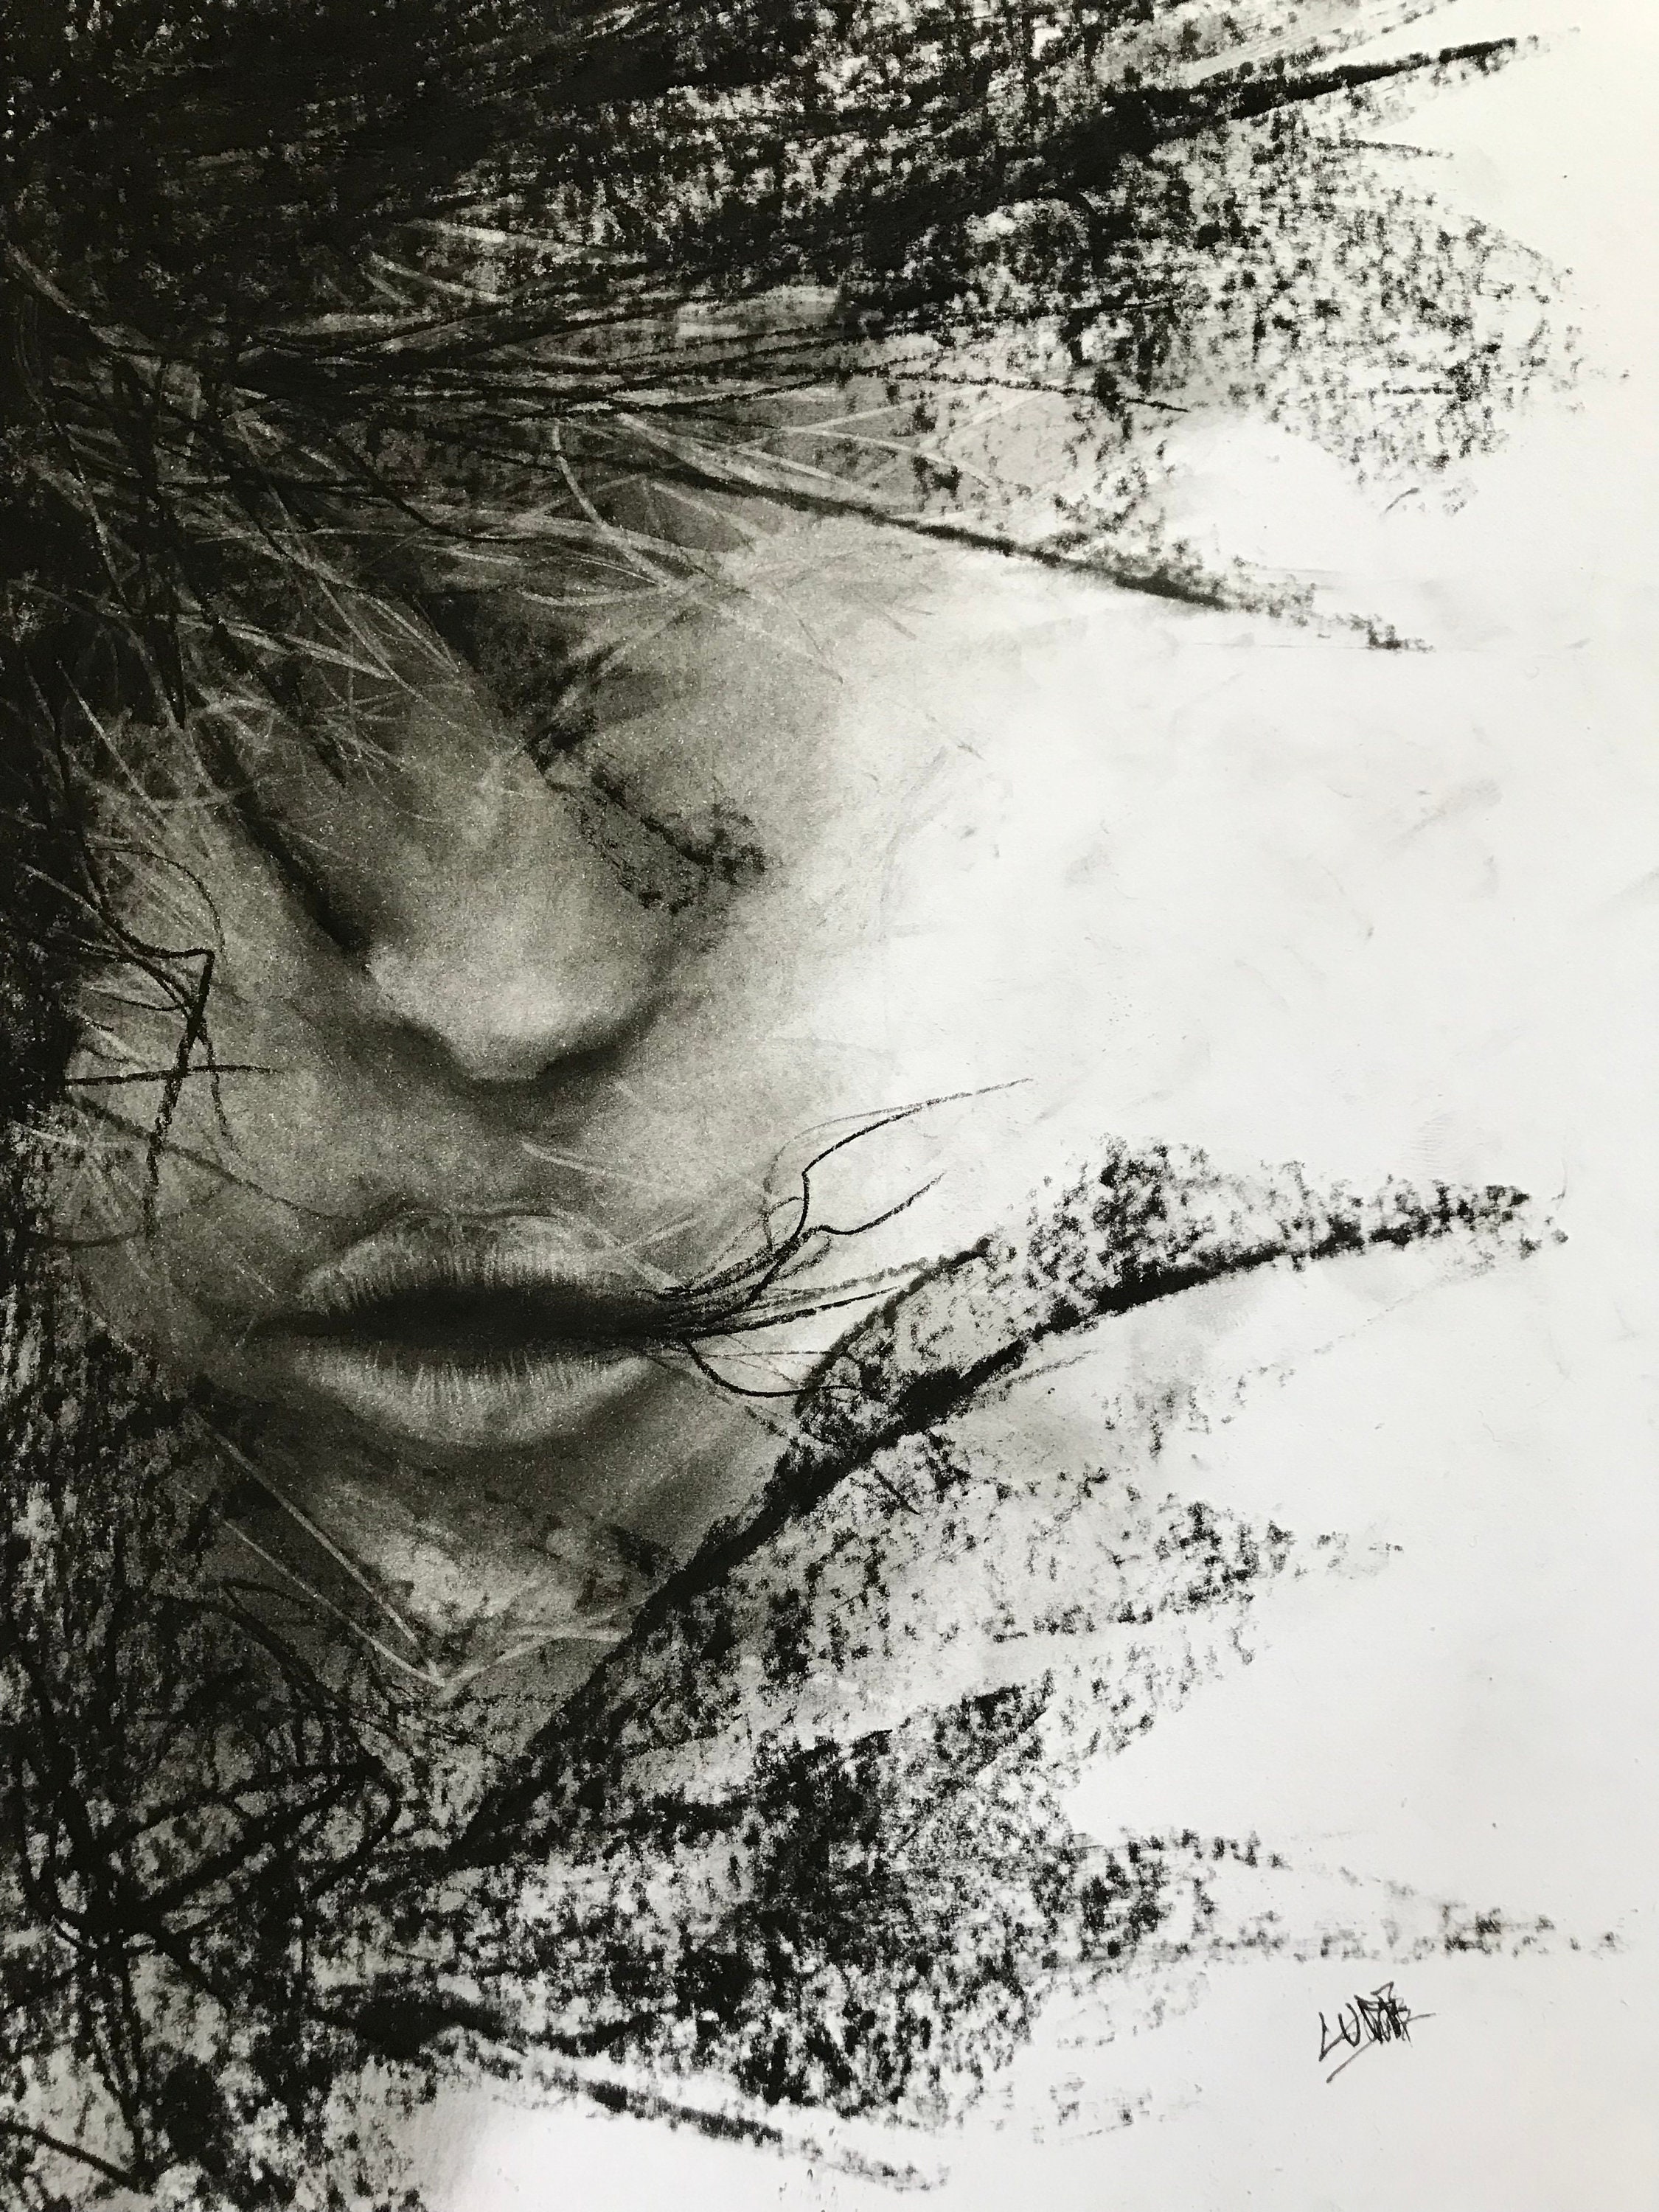 Have You Seen This Charcoal Artist Create Faces From Chaos?